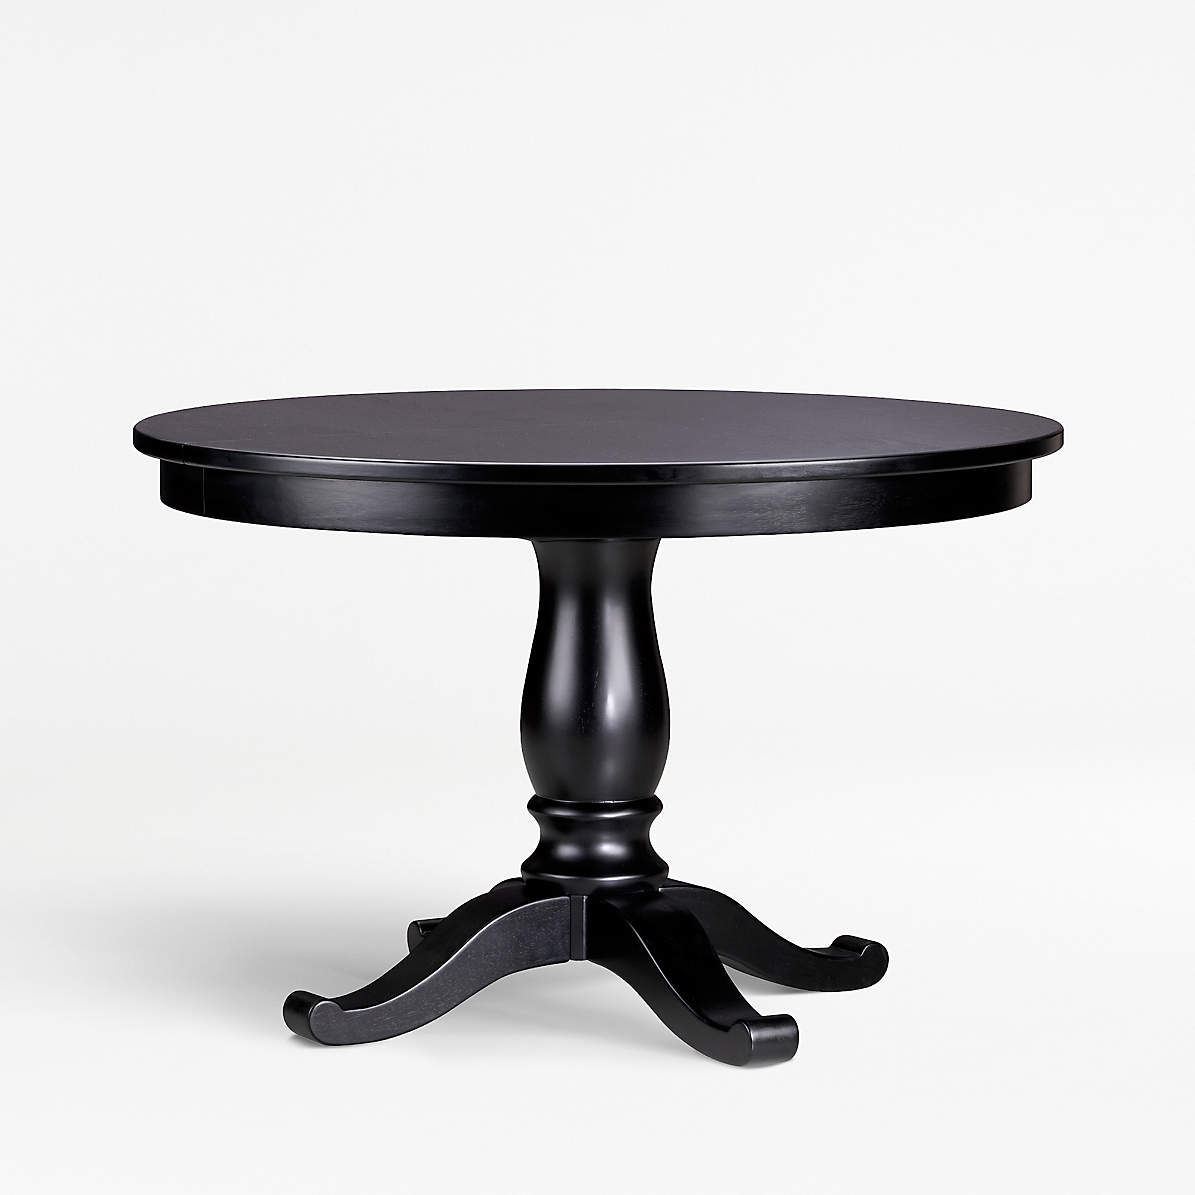 Black and brown round dining table Avalon 45 Black Round Extension Dining Table Reviews Crate And Barrel